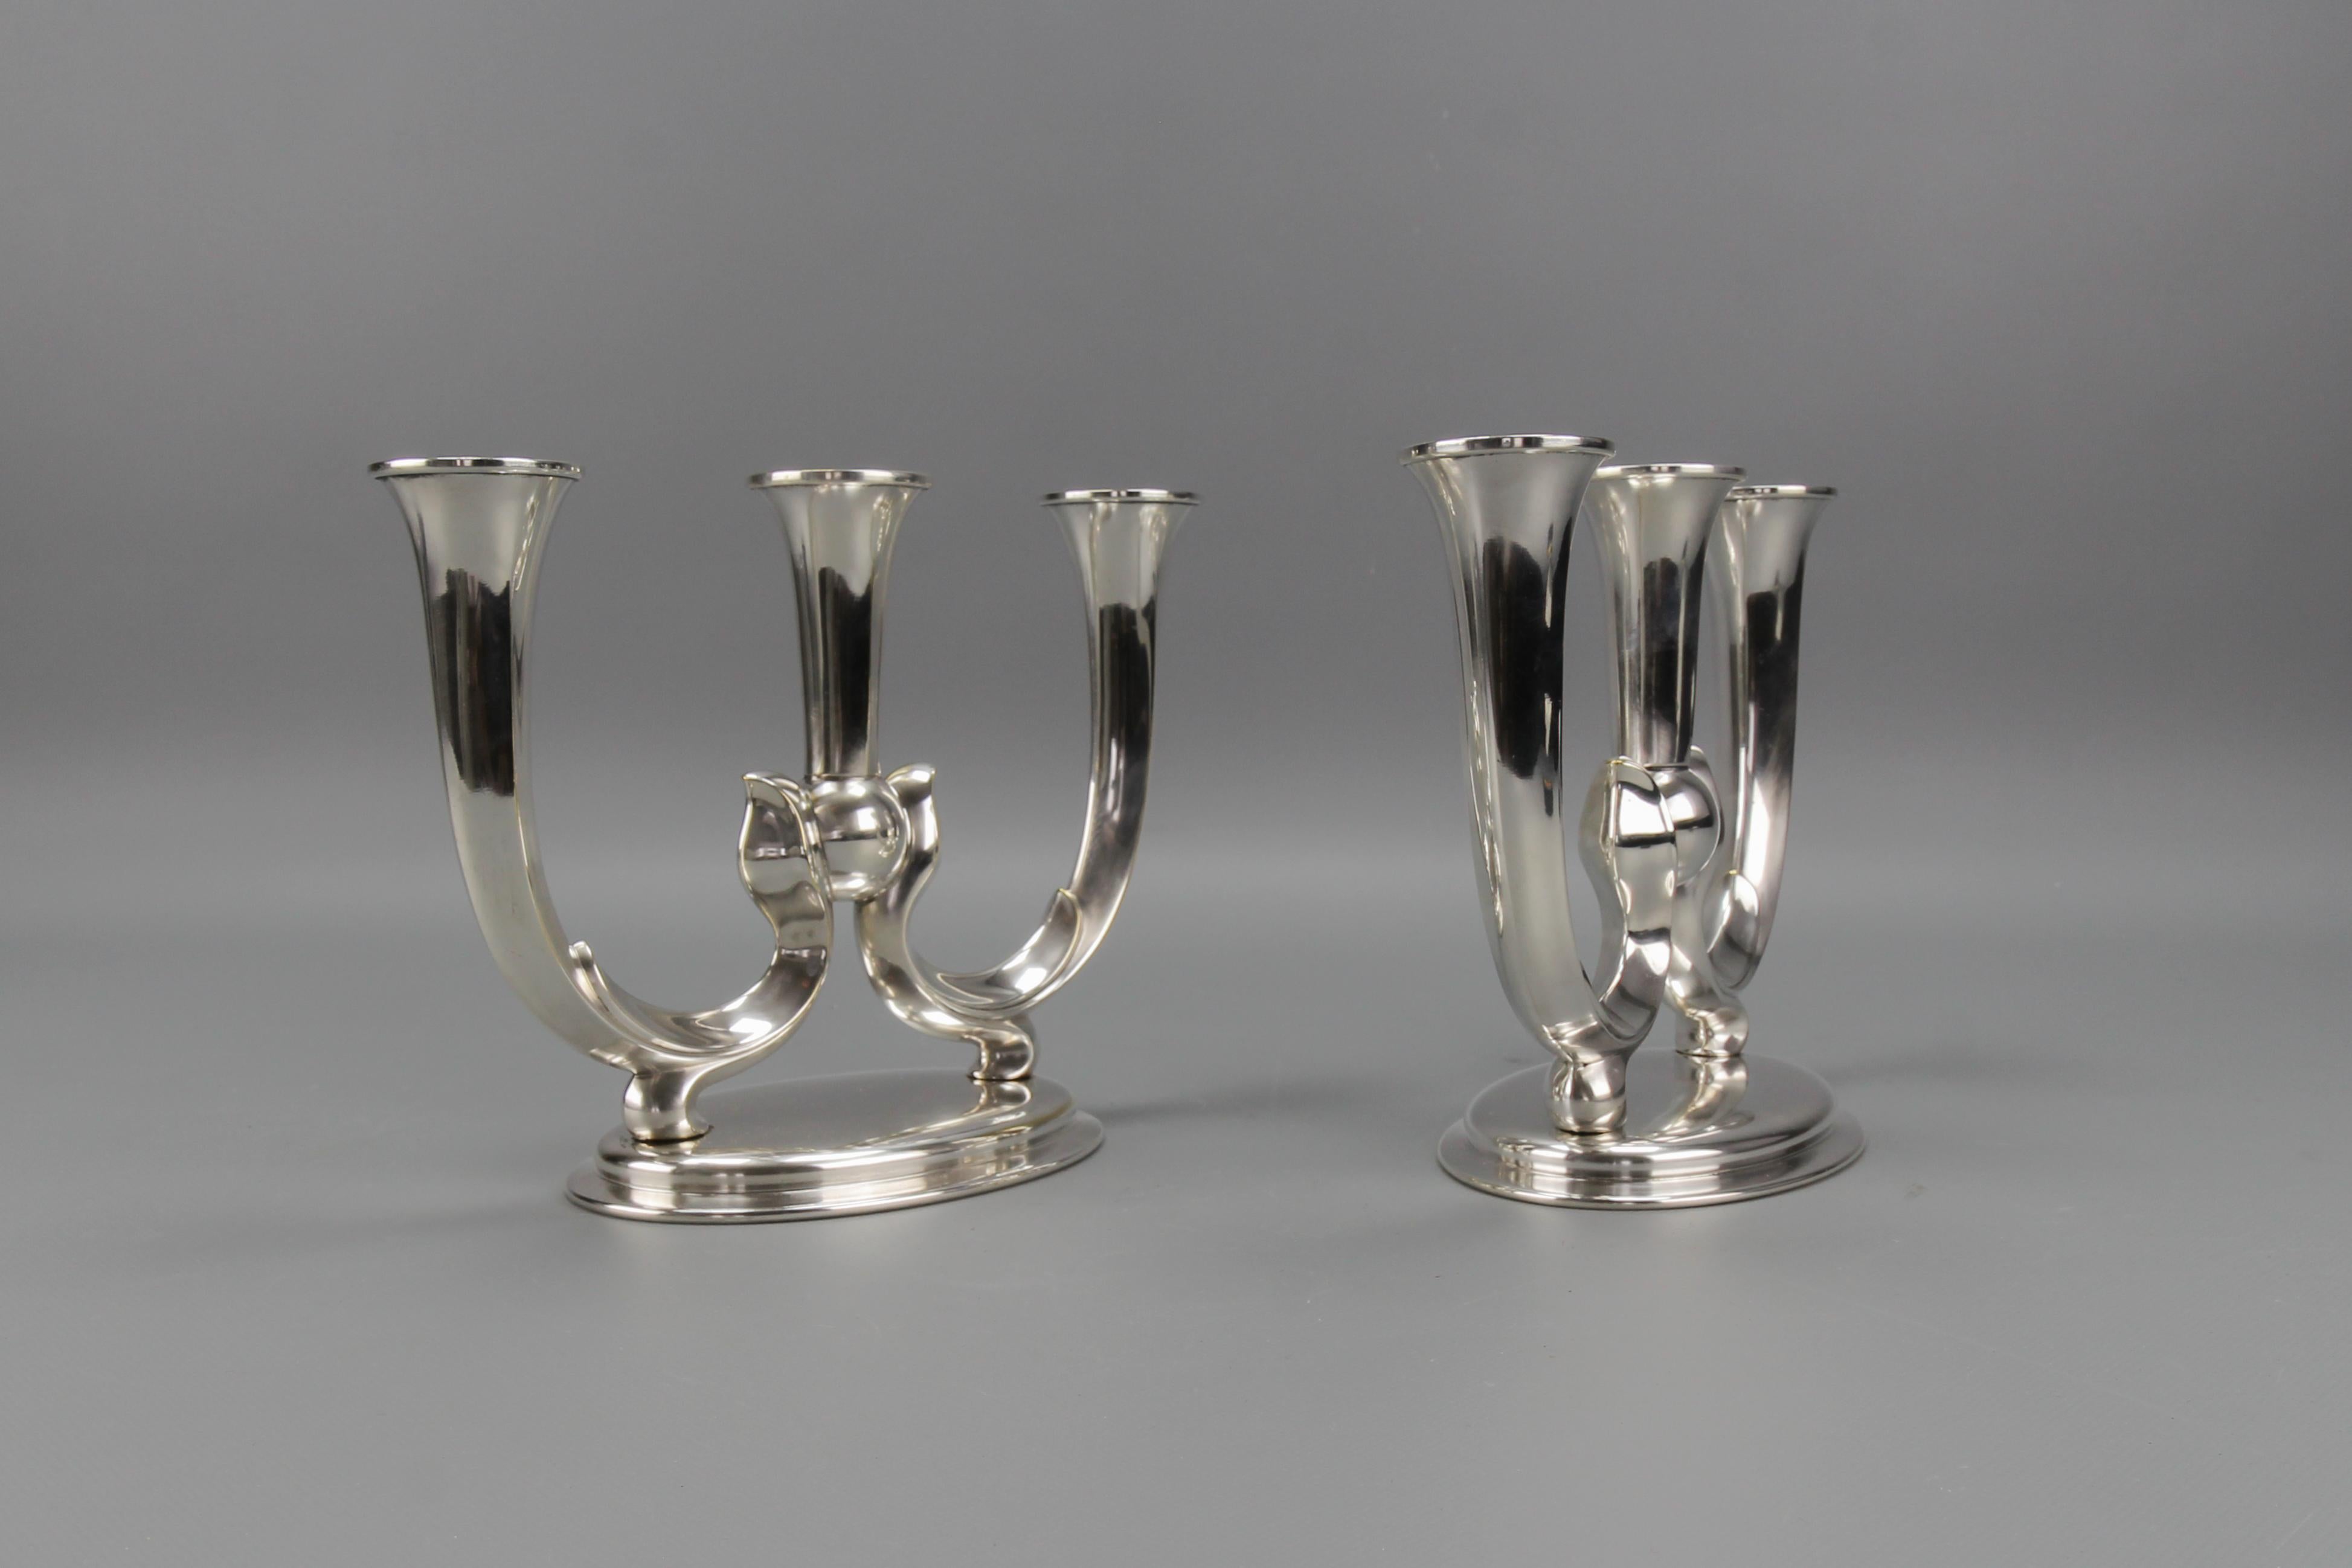 Pair of German WMF Art Deco Three-Arm Candle Holders For Sale 2